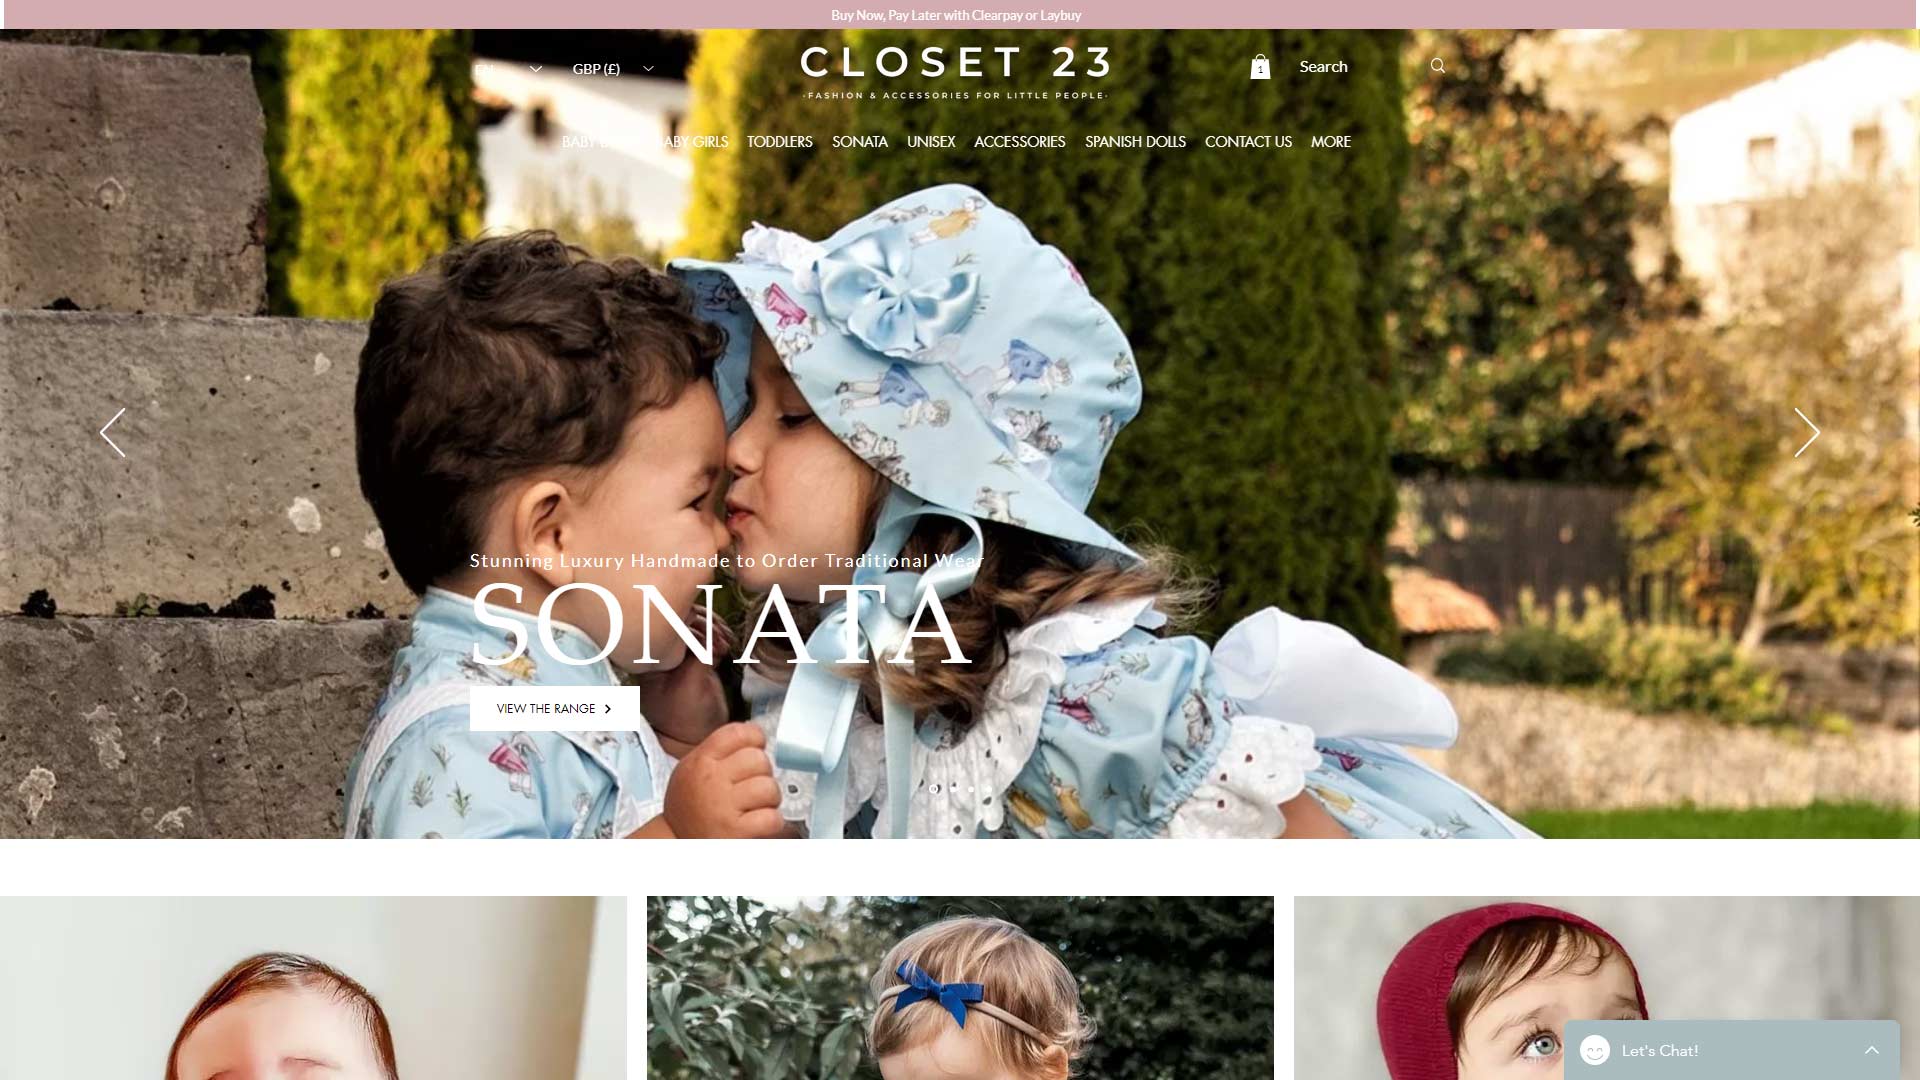 the homepage of a clothing site